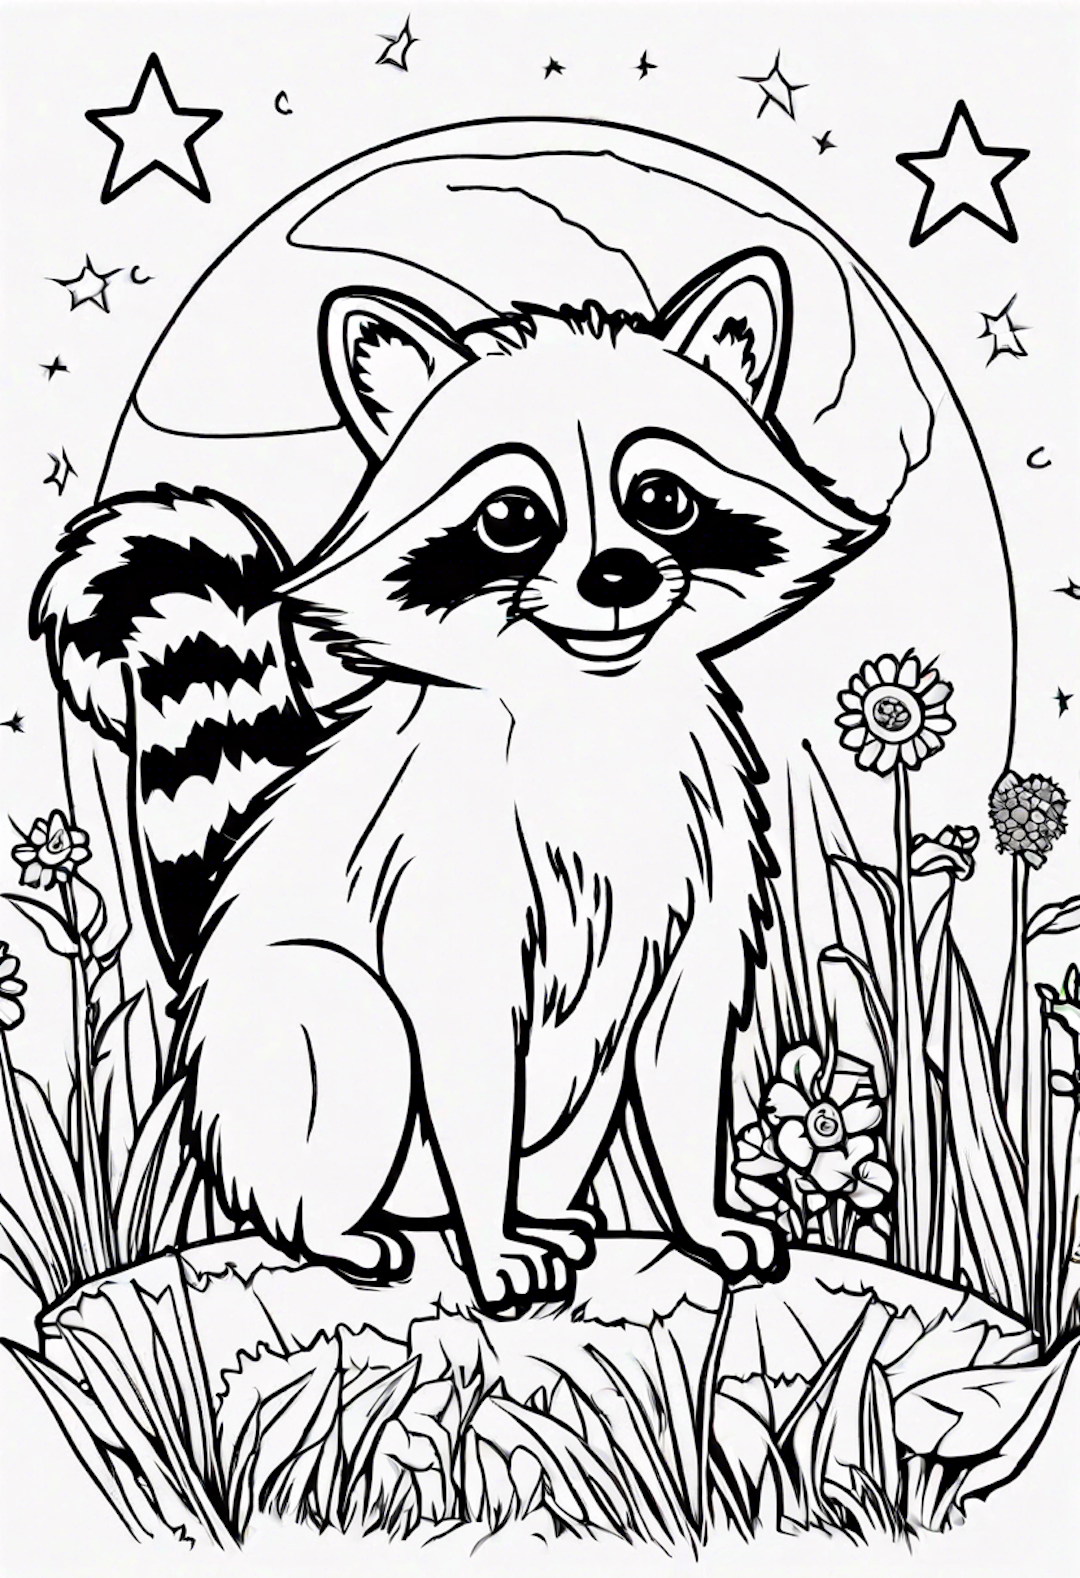 A Mischievous Star Gardening With A Sneaky Raccoon